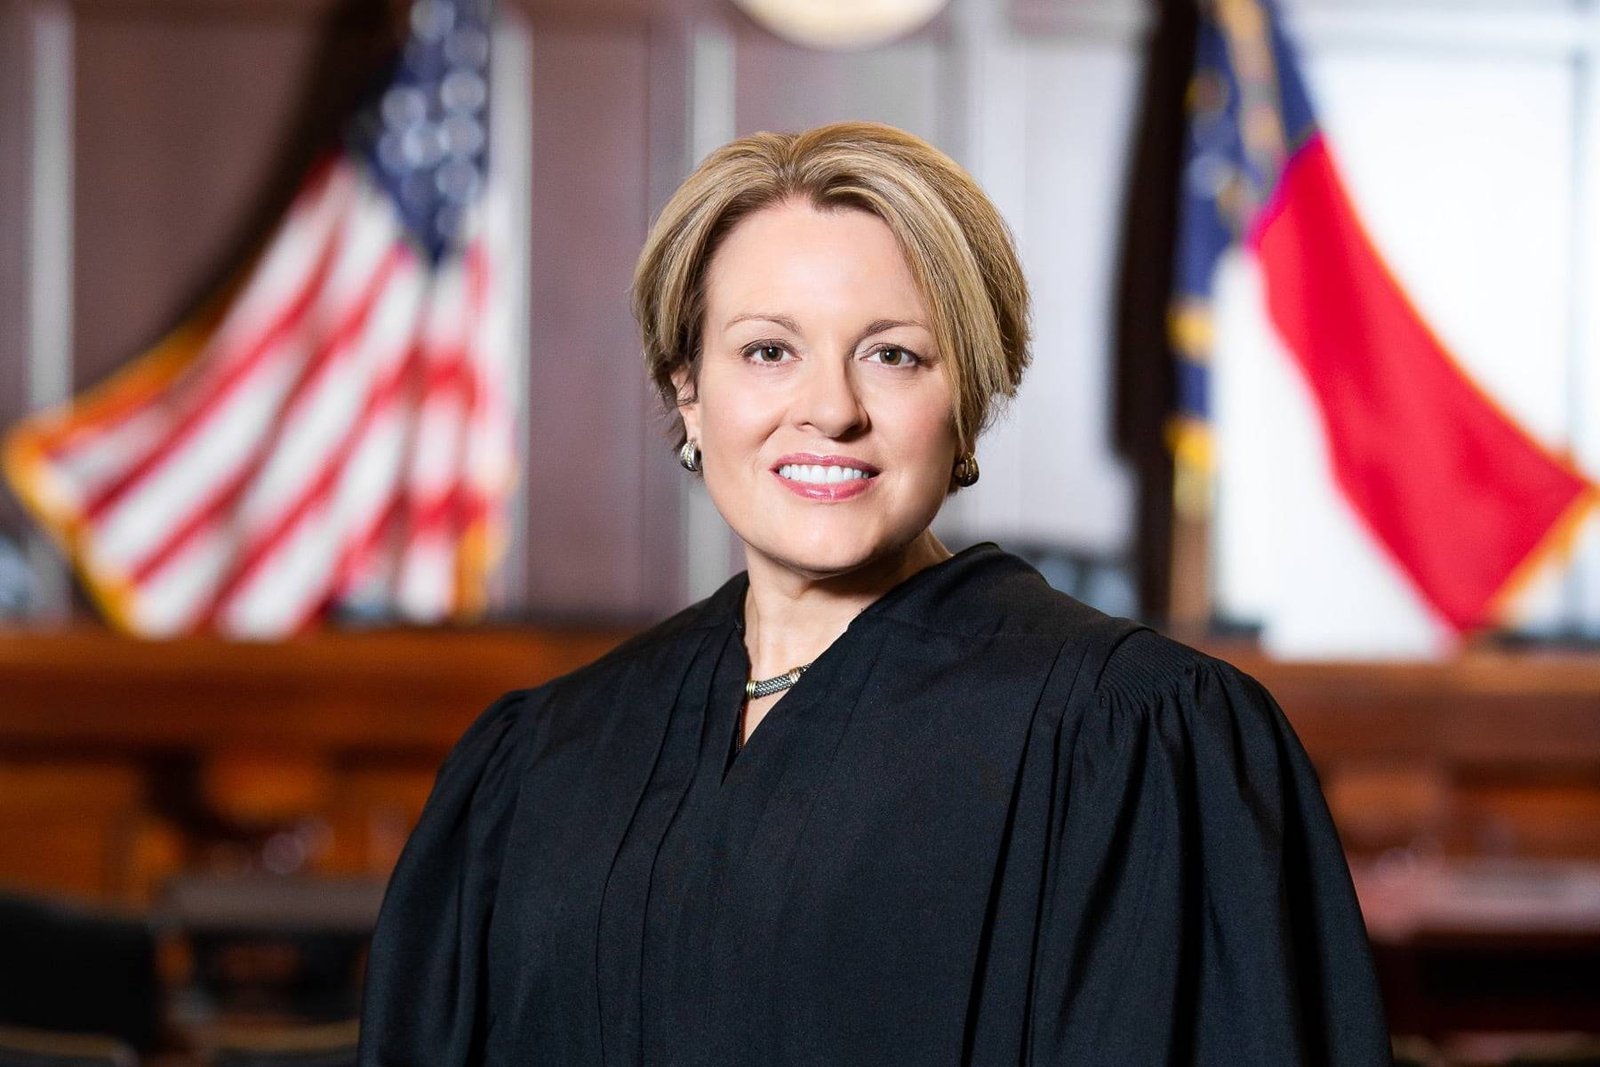 North Carolina Appeals Court Chief Judge Replaced